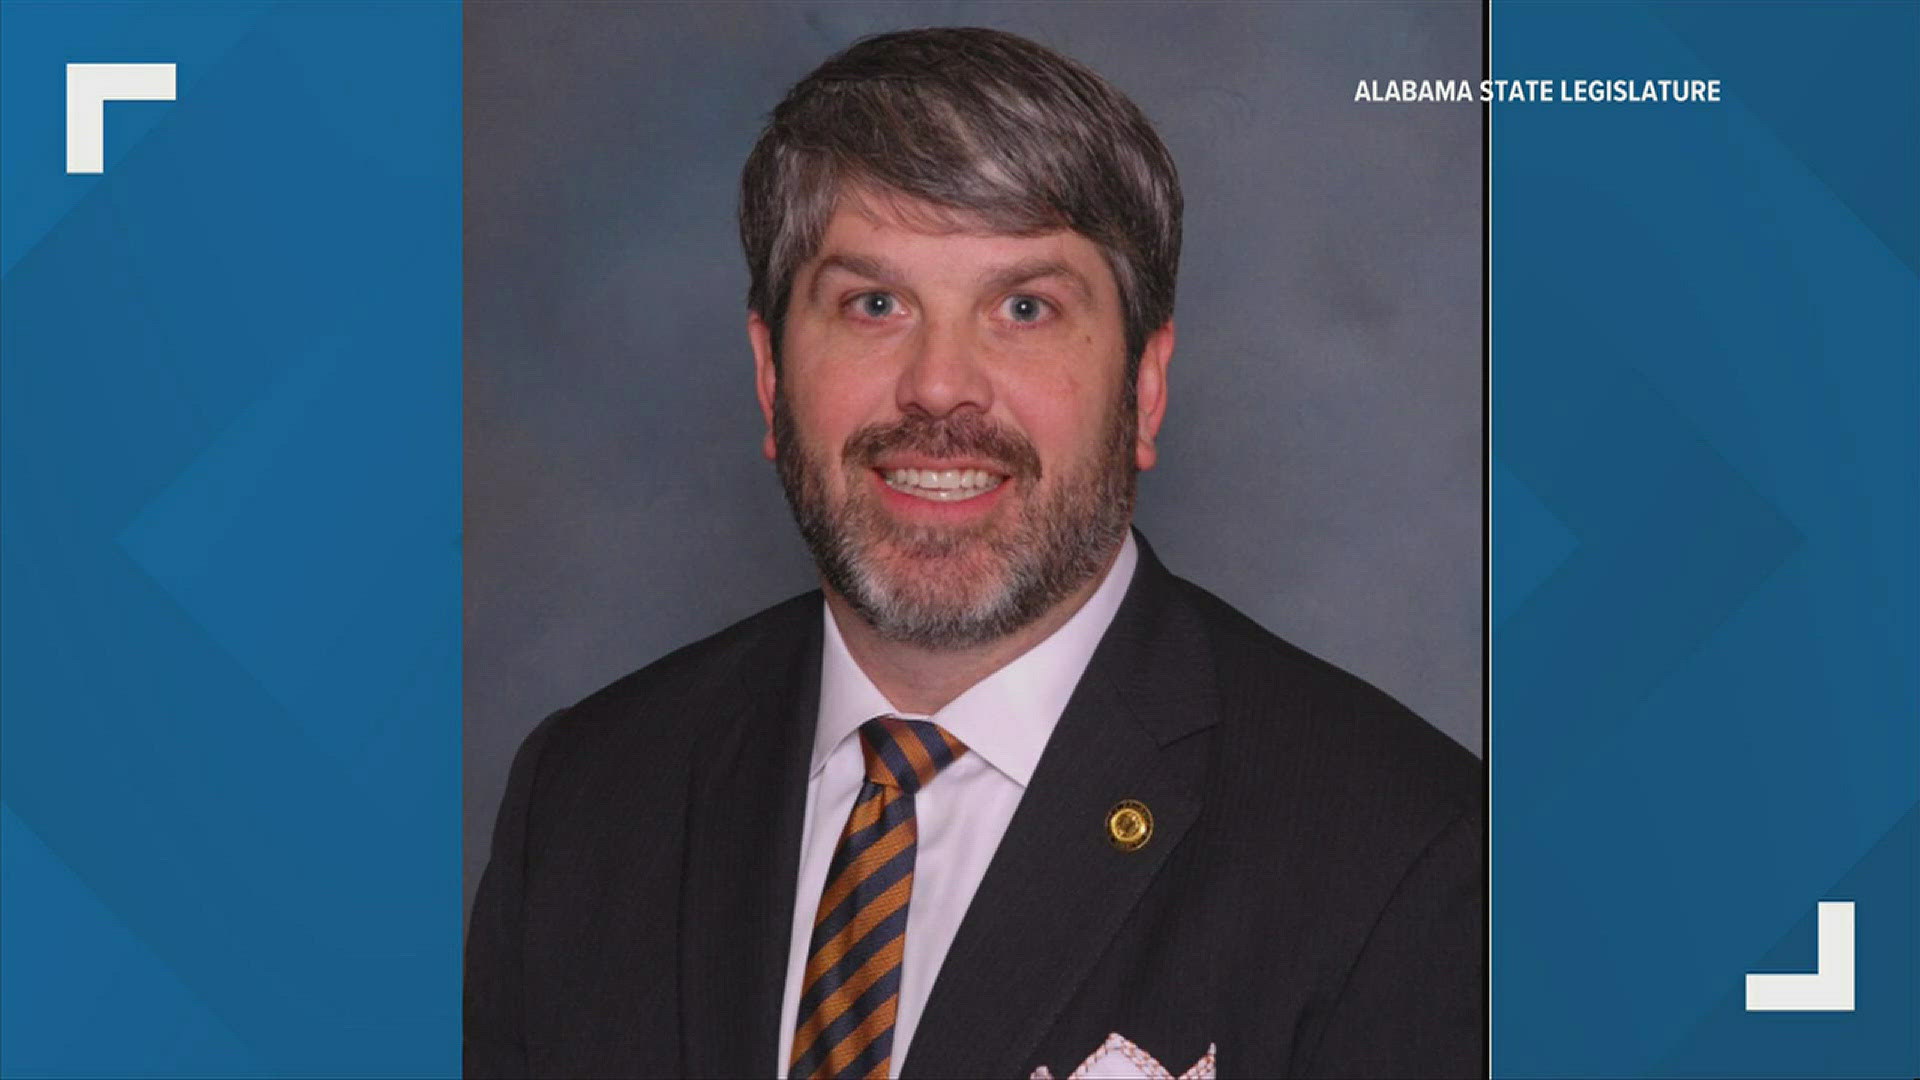 Sen. Garlan Gudger of Cullman was reportedly hit from behind by his son, sending the senator into the water. He's being treated for internal injuries.